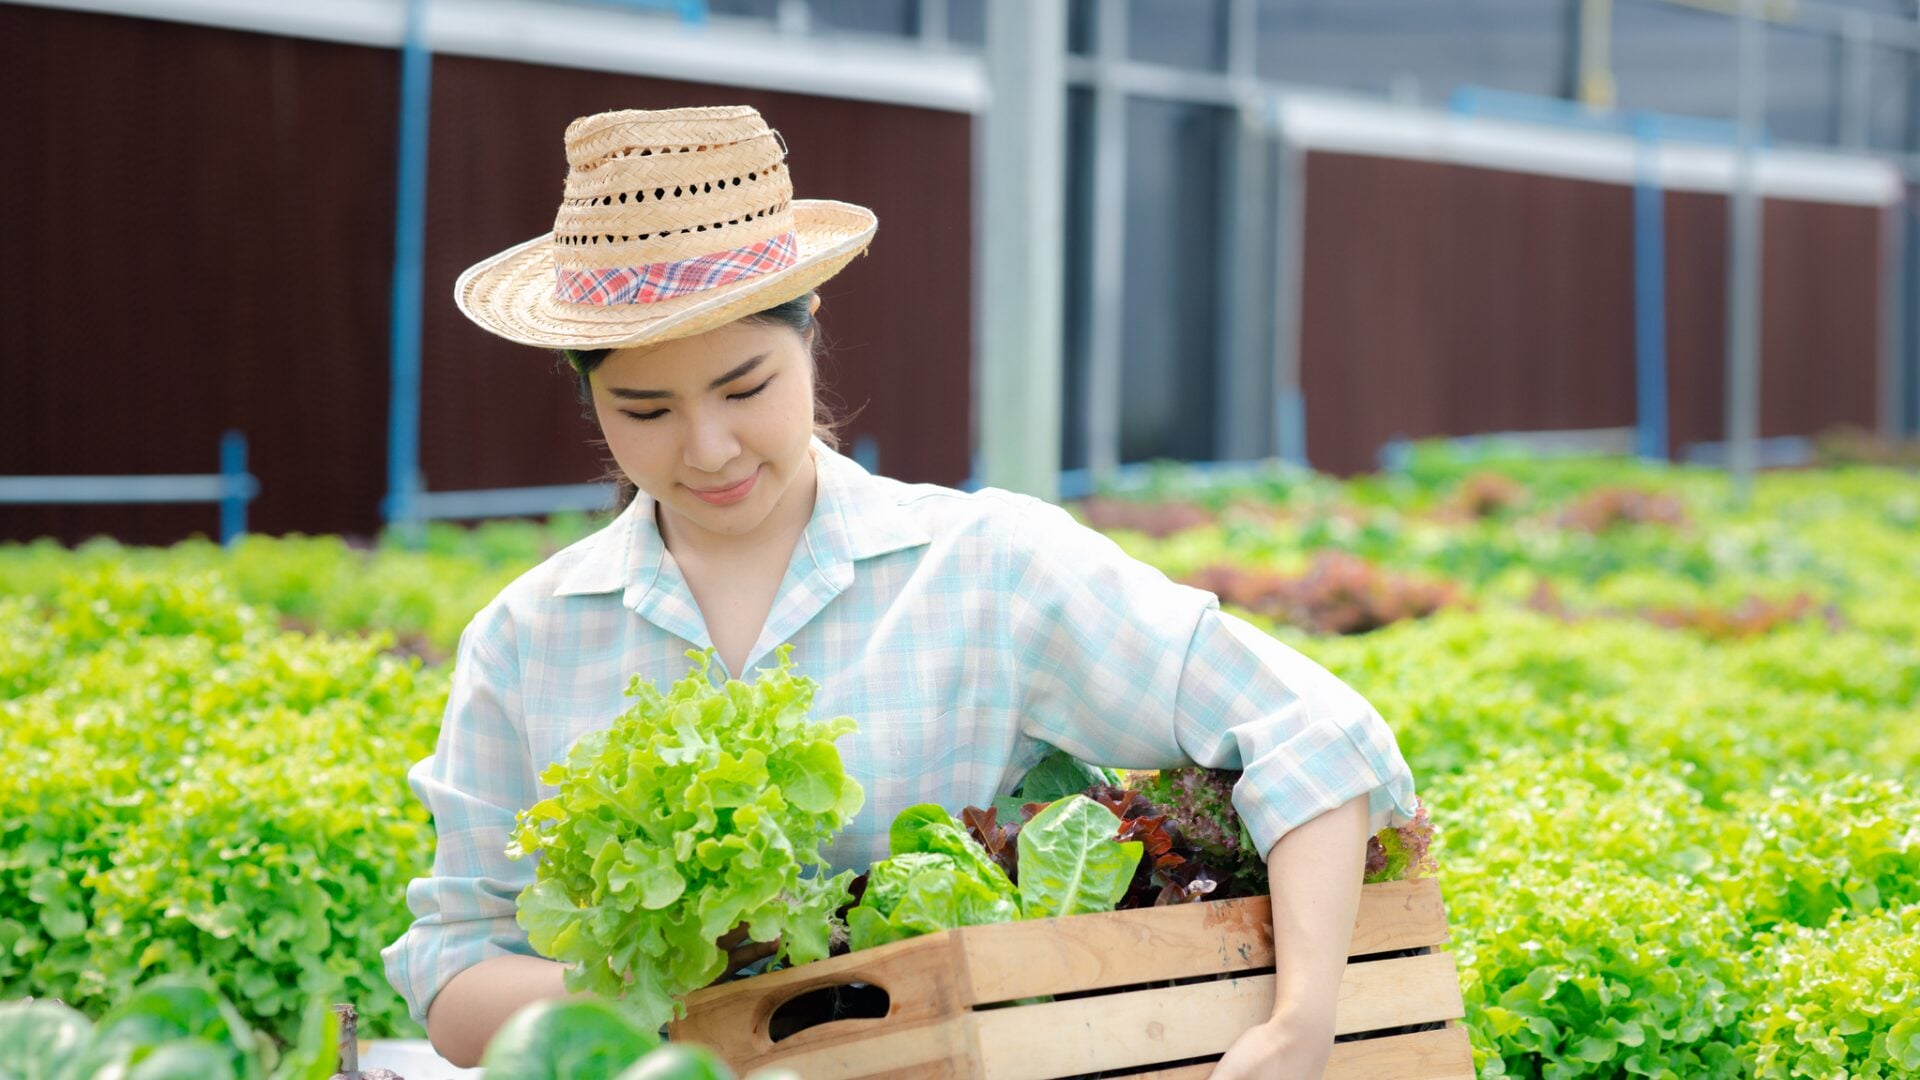 A woman harvesting fresh hydroponic vegetables from the farm.